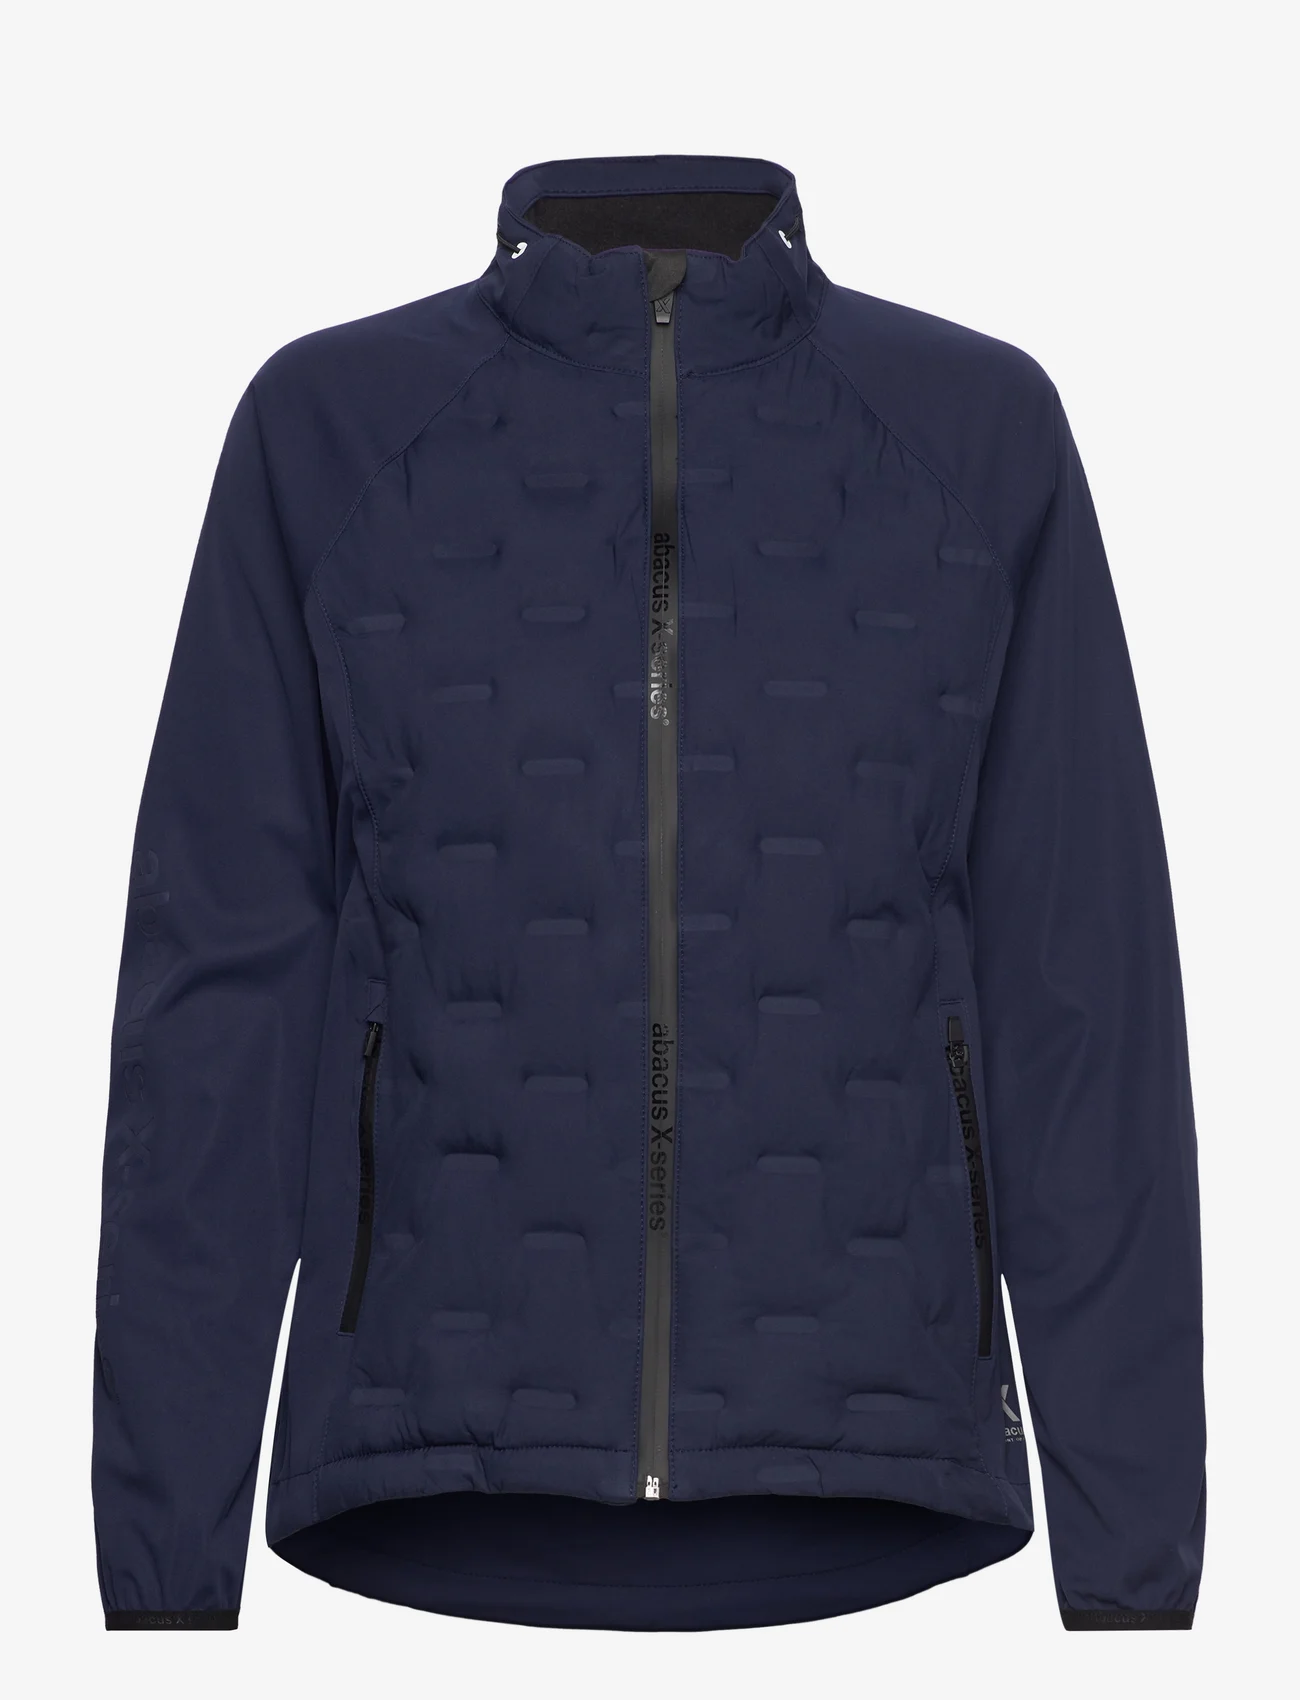 Abacus - Lds PDX waterproof jacket - golf jackets - midnight navy - 0